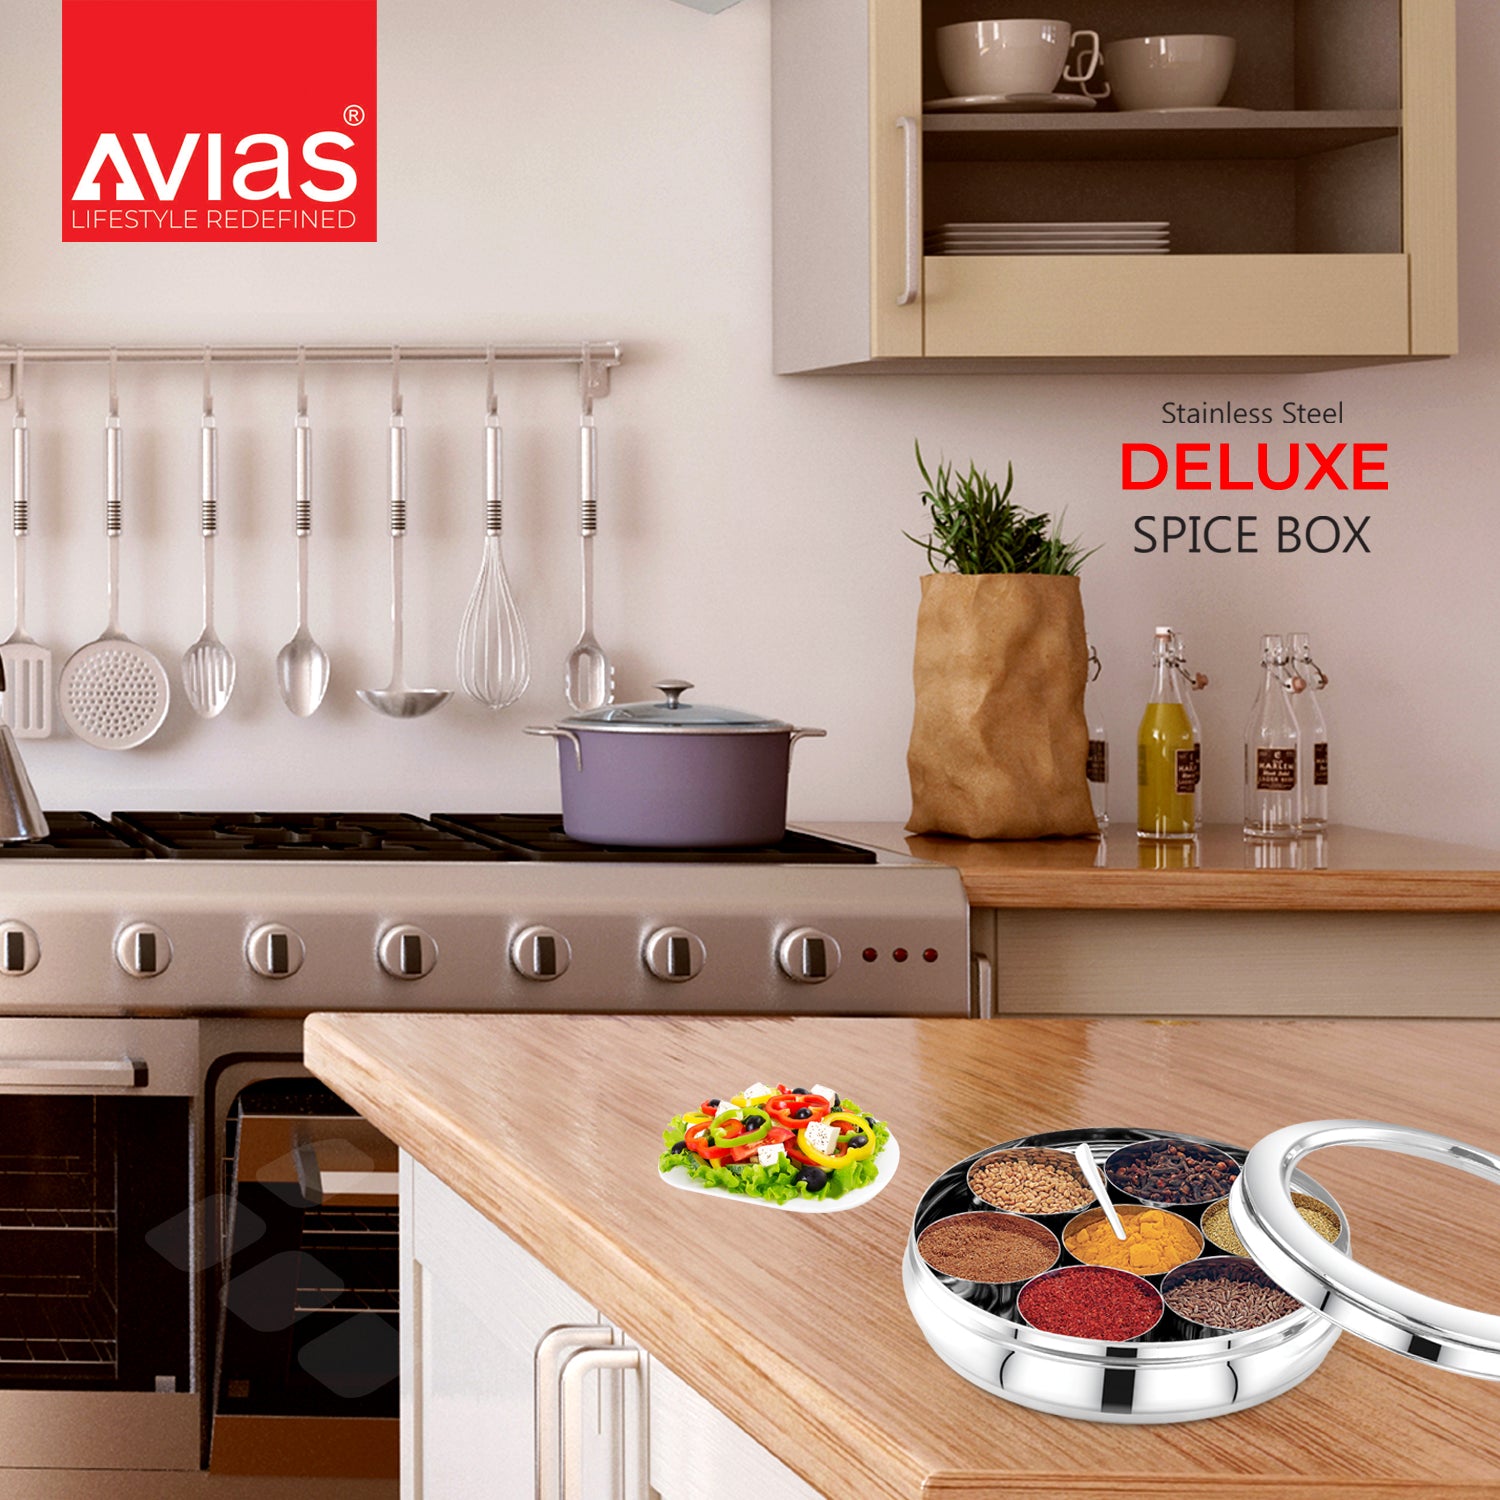 AVIAS Stainless steel Deluxe Spice box with spices for kitchen